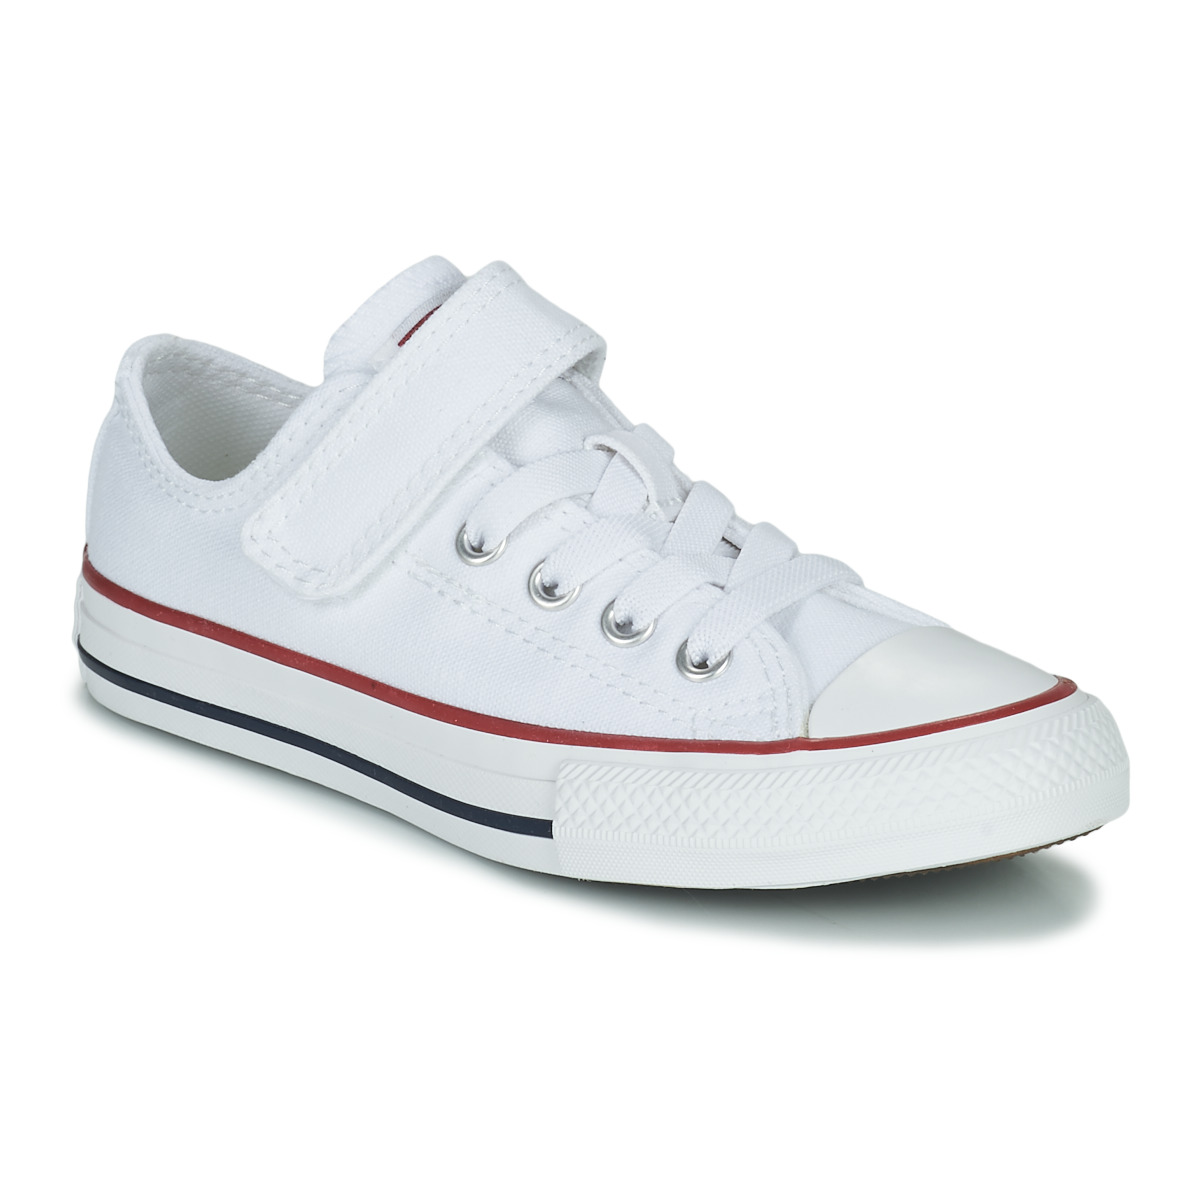 Schuhe Kinder Sneaker Low Converse Chuck Taylor All Star 1V Foundation Ox Weiss